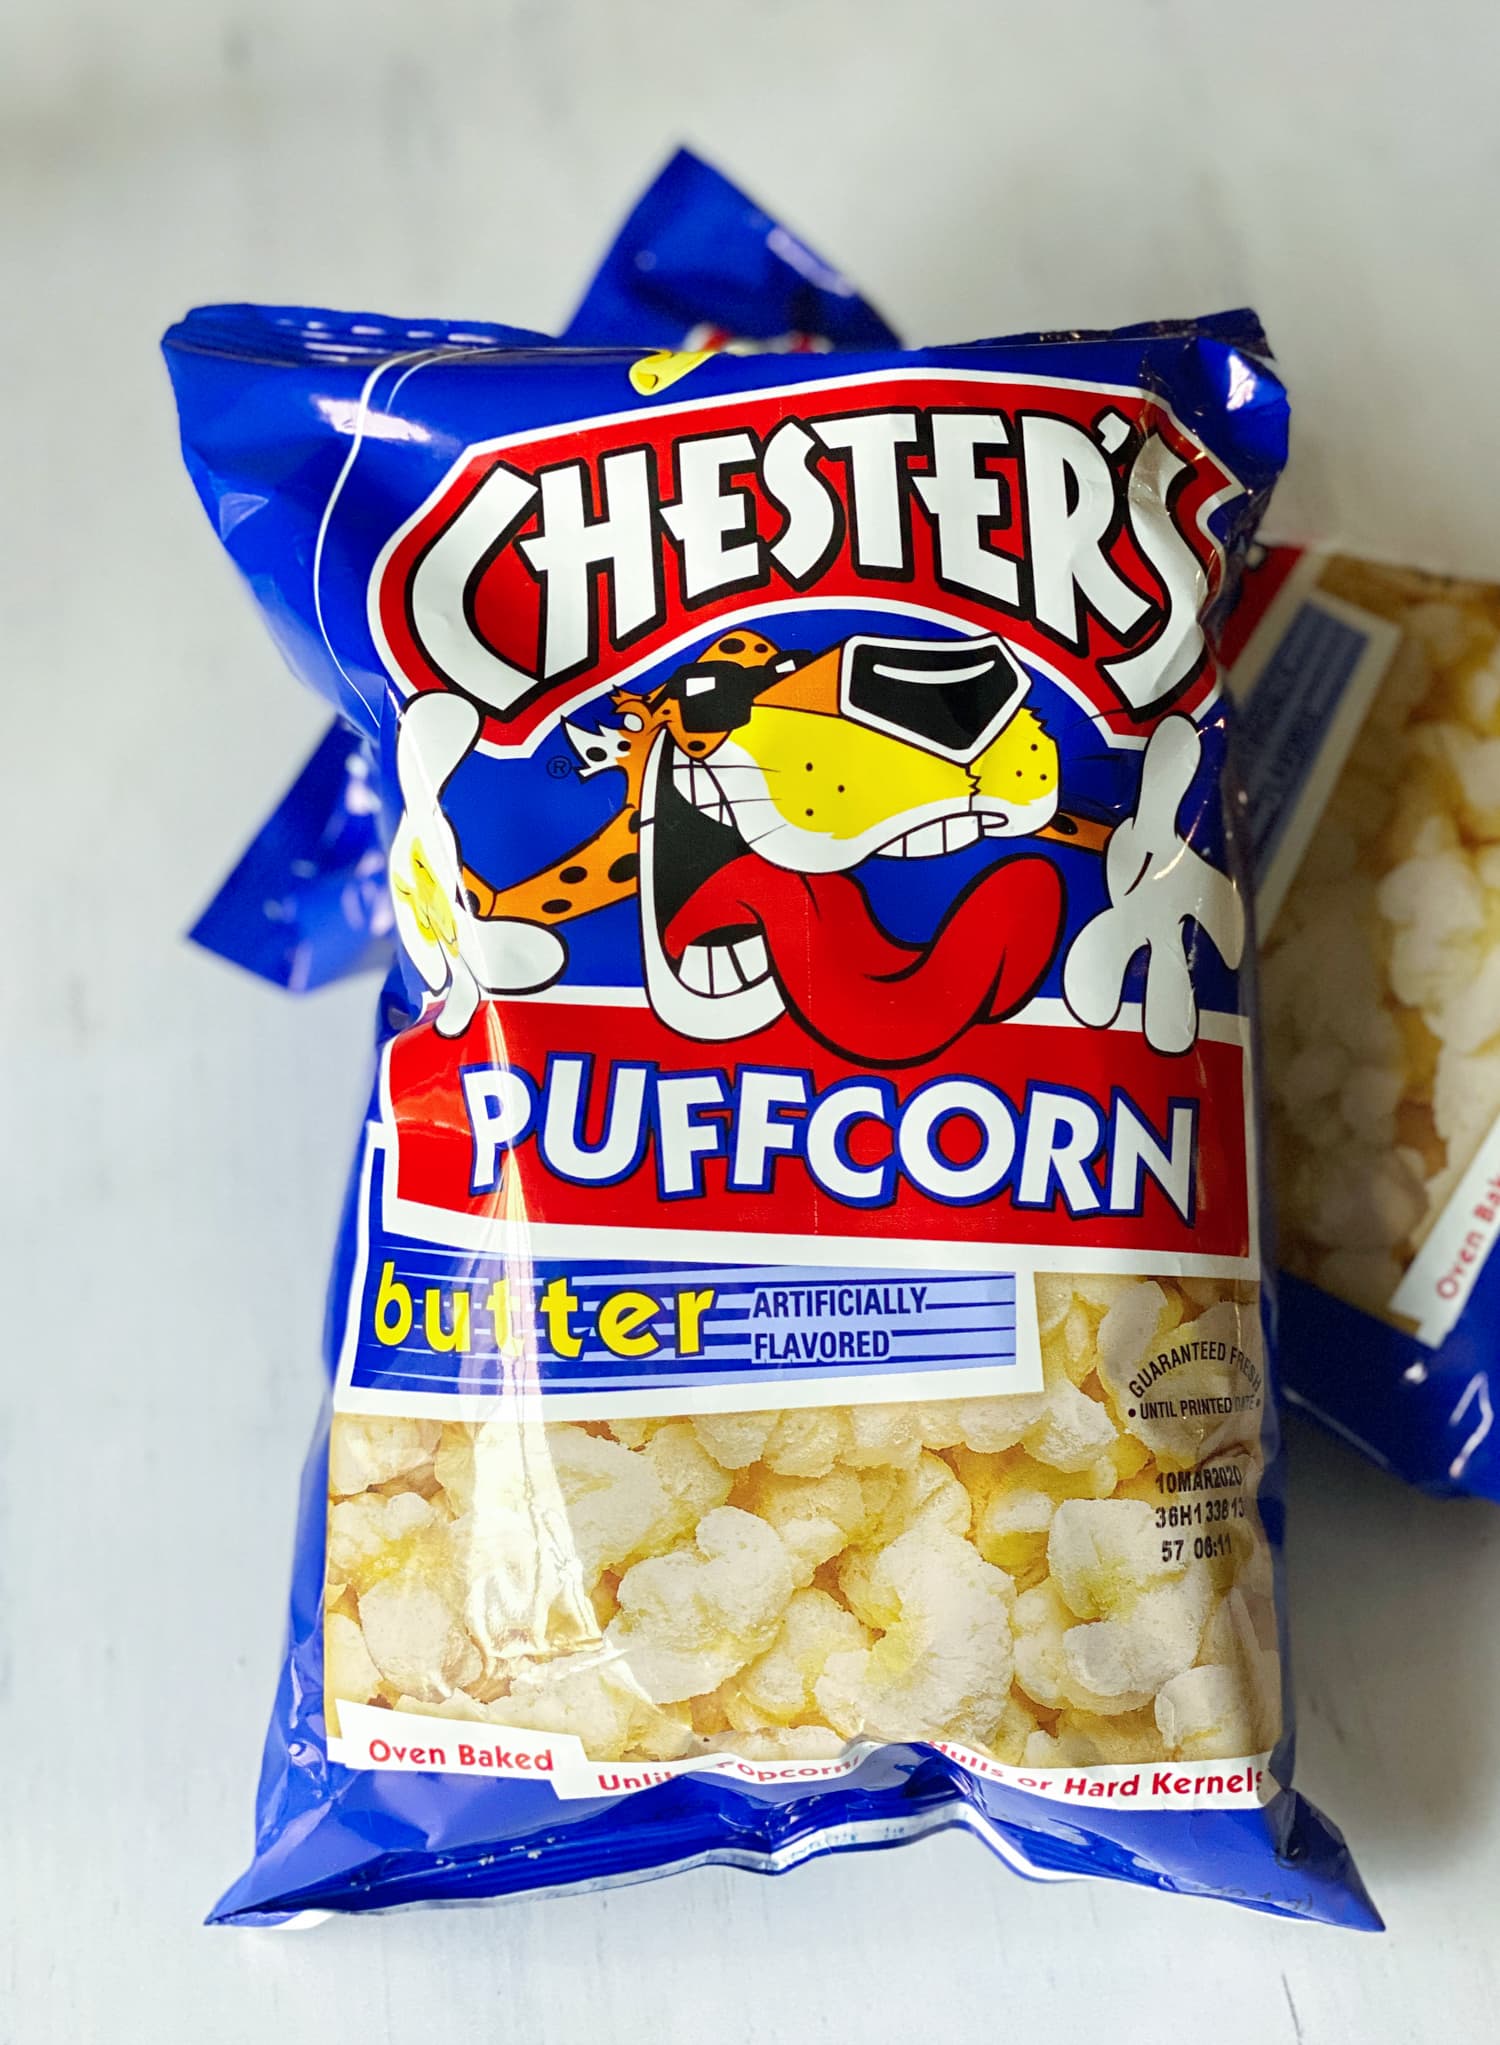 A bag of Butter flavored Chester's Puffcorn